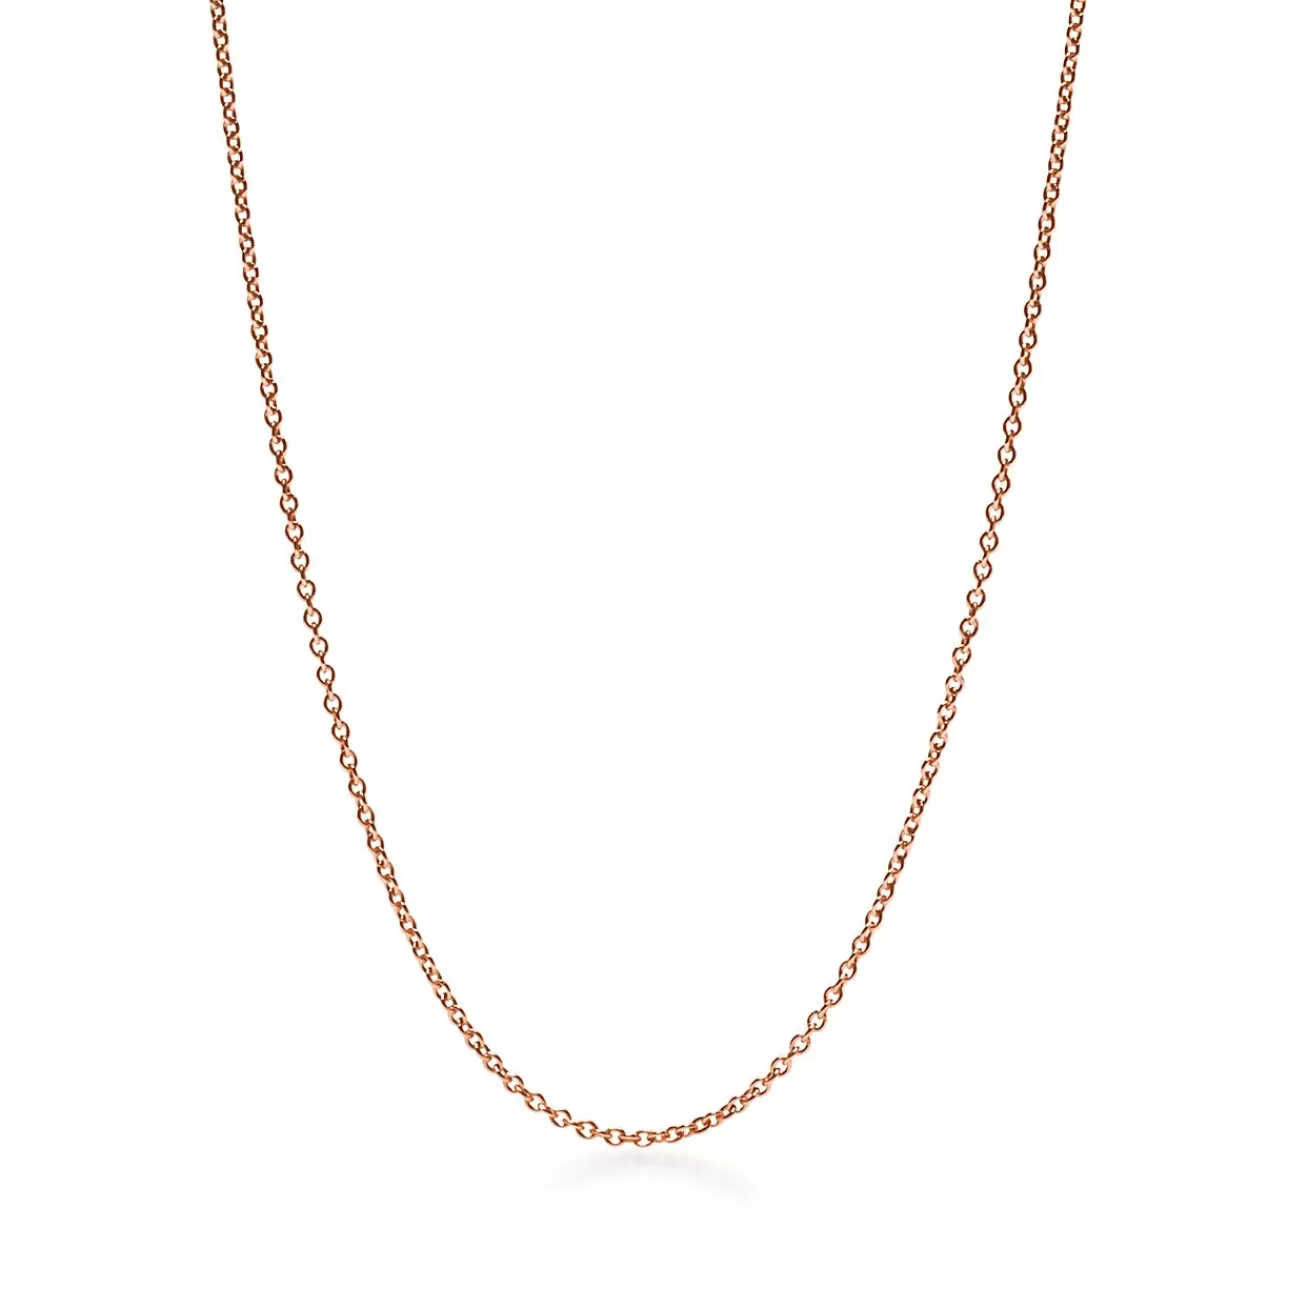 Tiffany & Co. Rose Gold Necklace Chain | ^ Necklaces & Pendants | Men's Jewelry